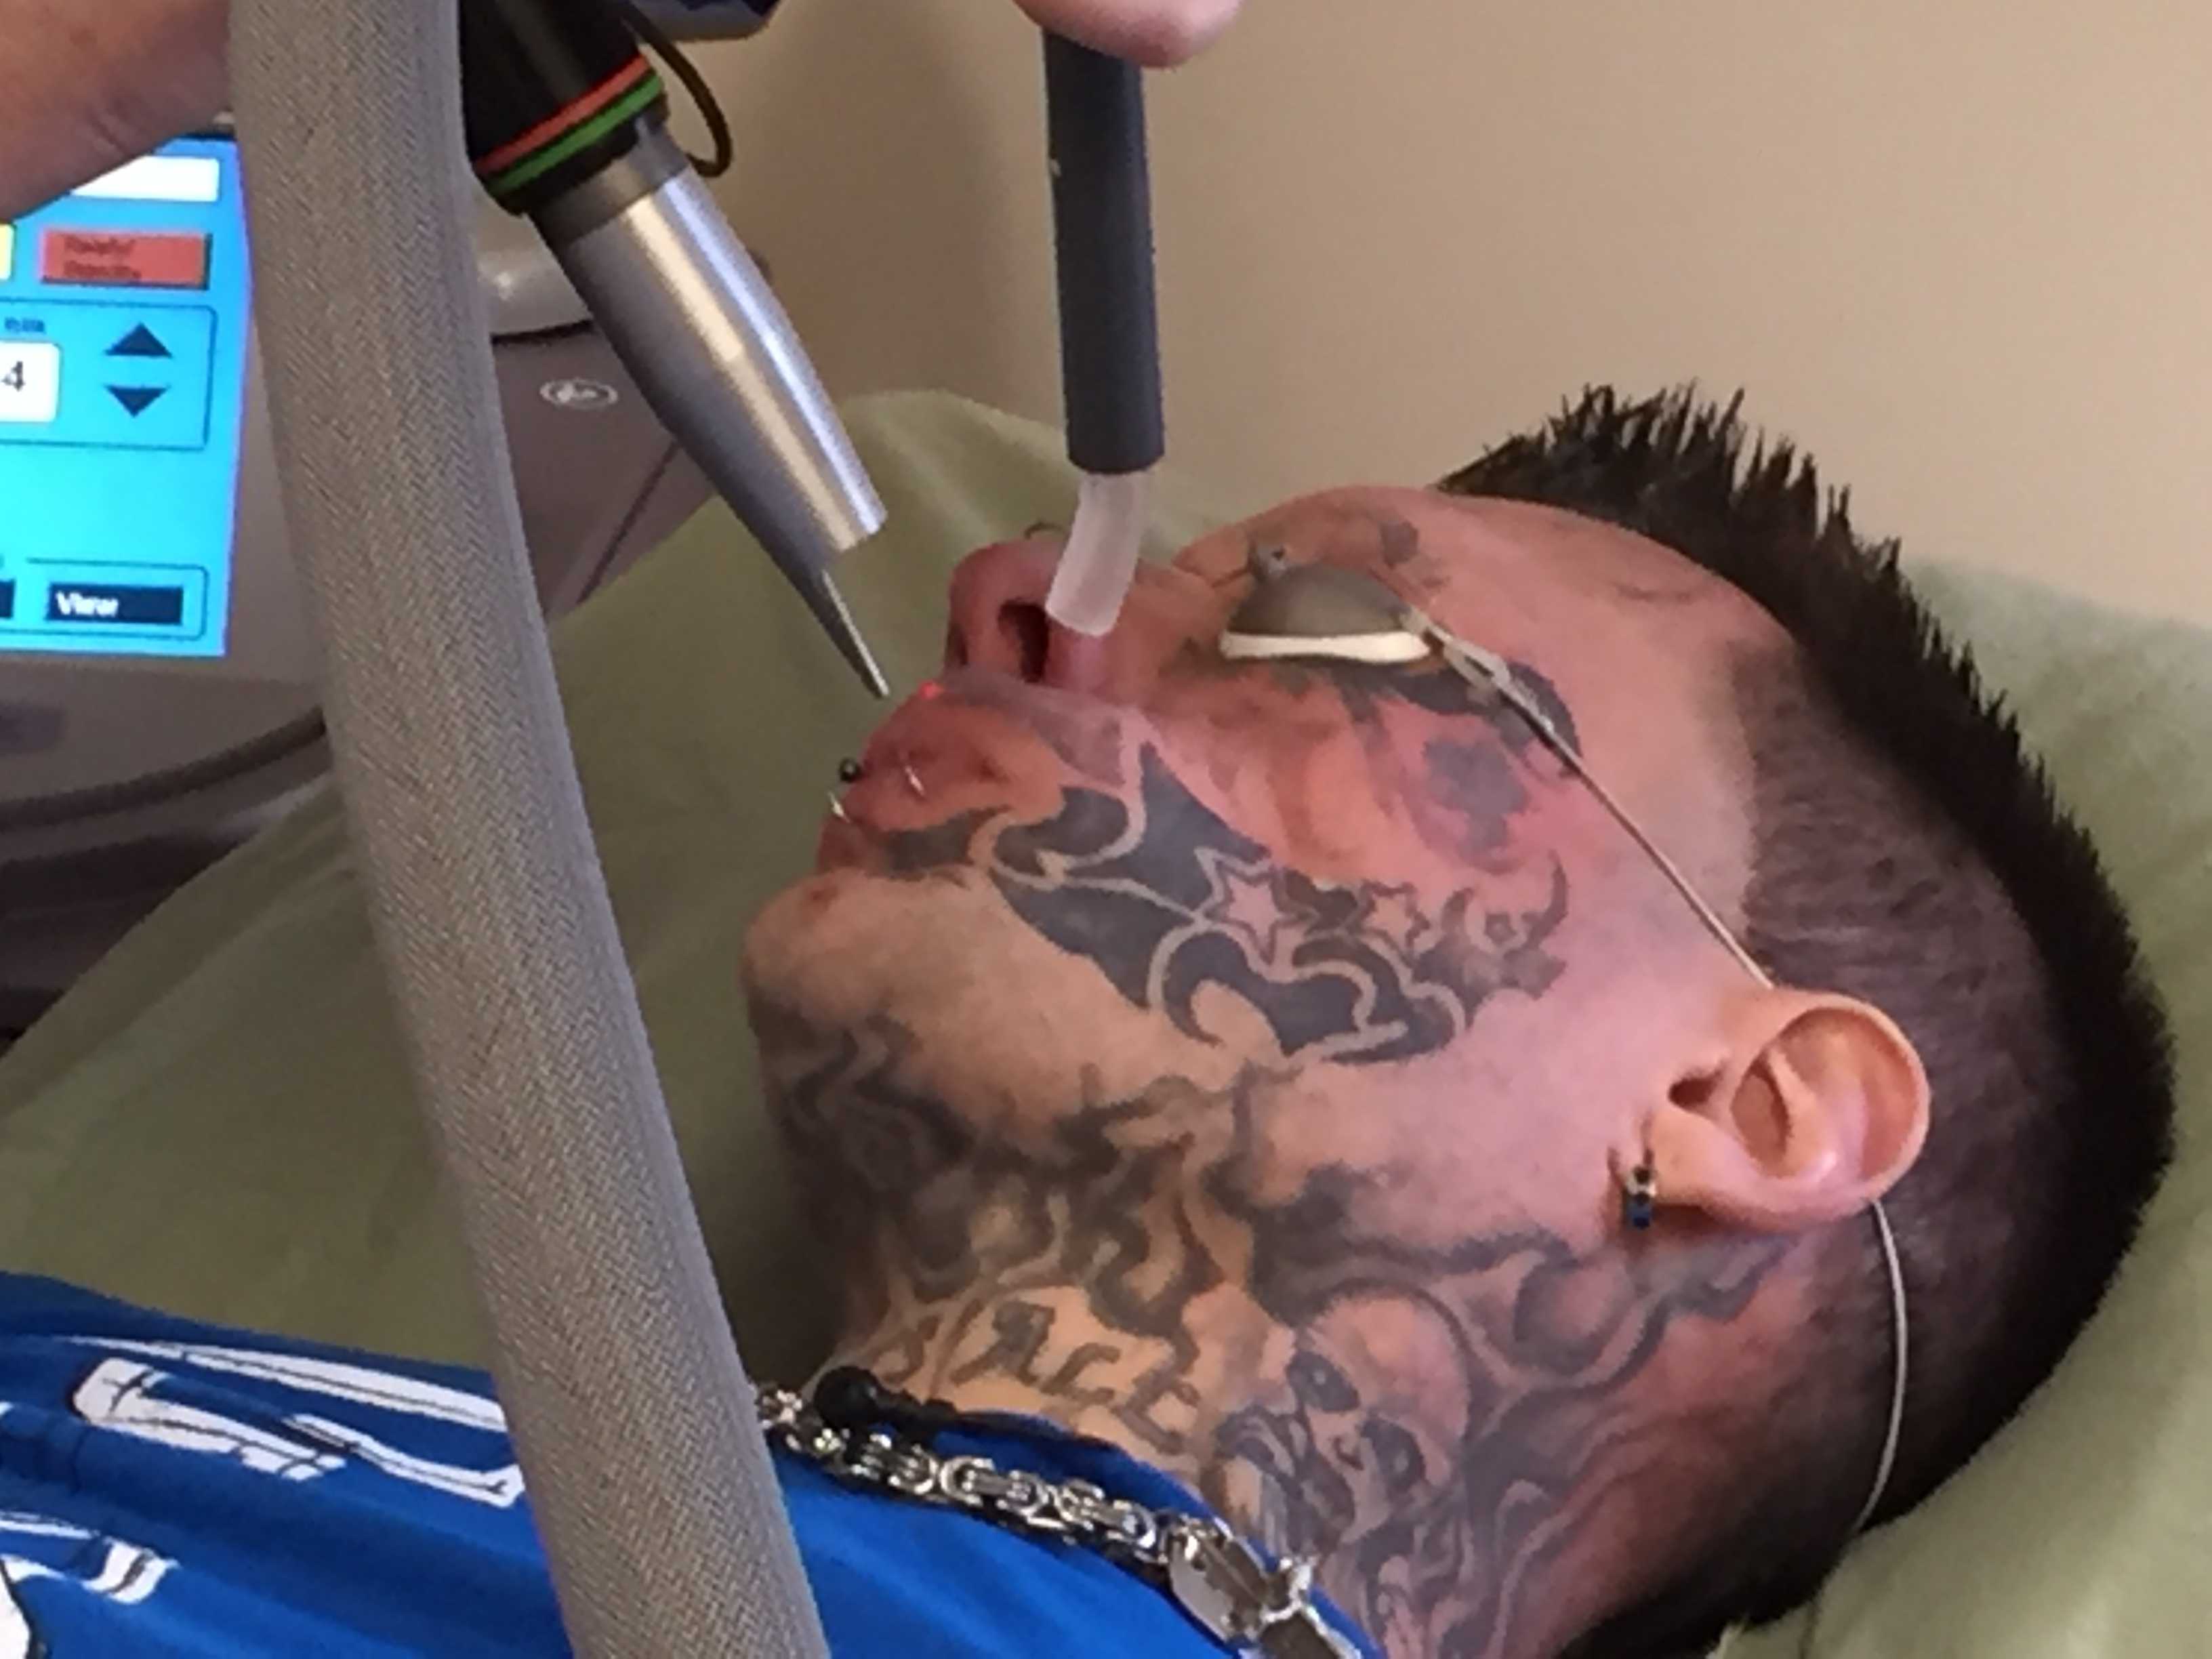 World's Fastest Tattoo Removal. Removing tattoos in weeks!